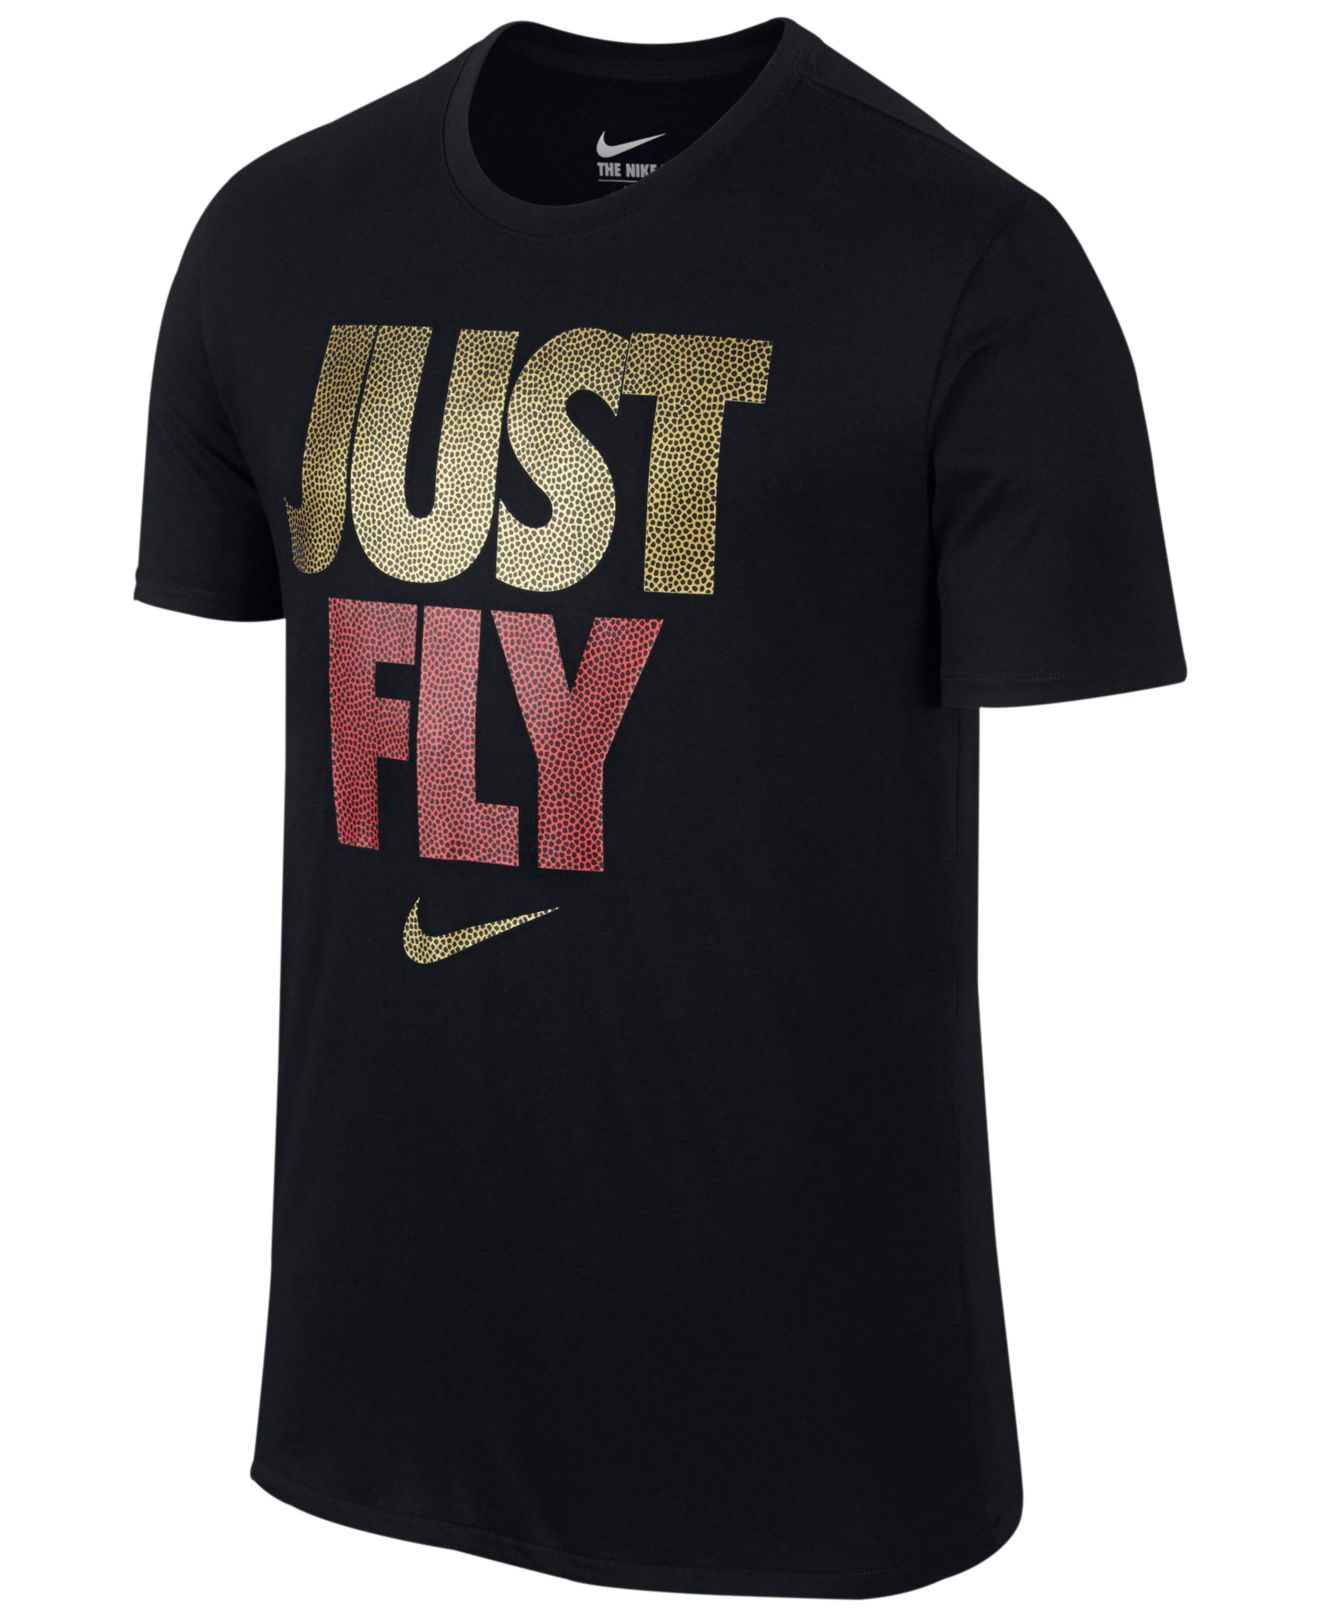 Lyst - Nike Graphic T-shirt in Black for Men